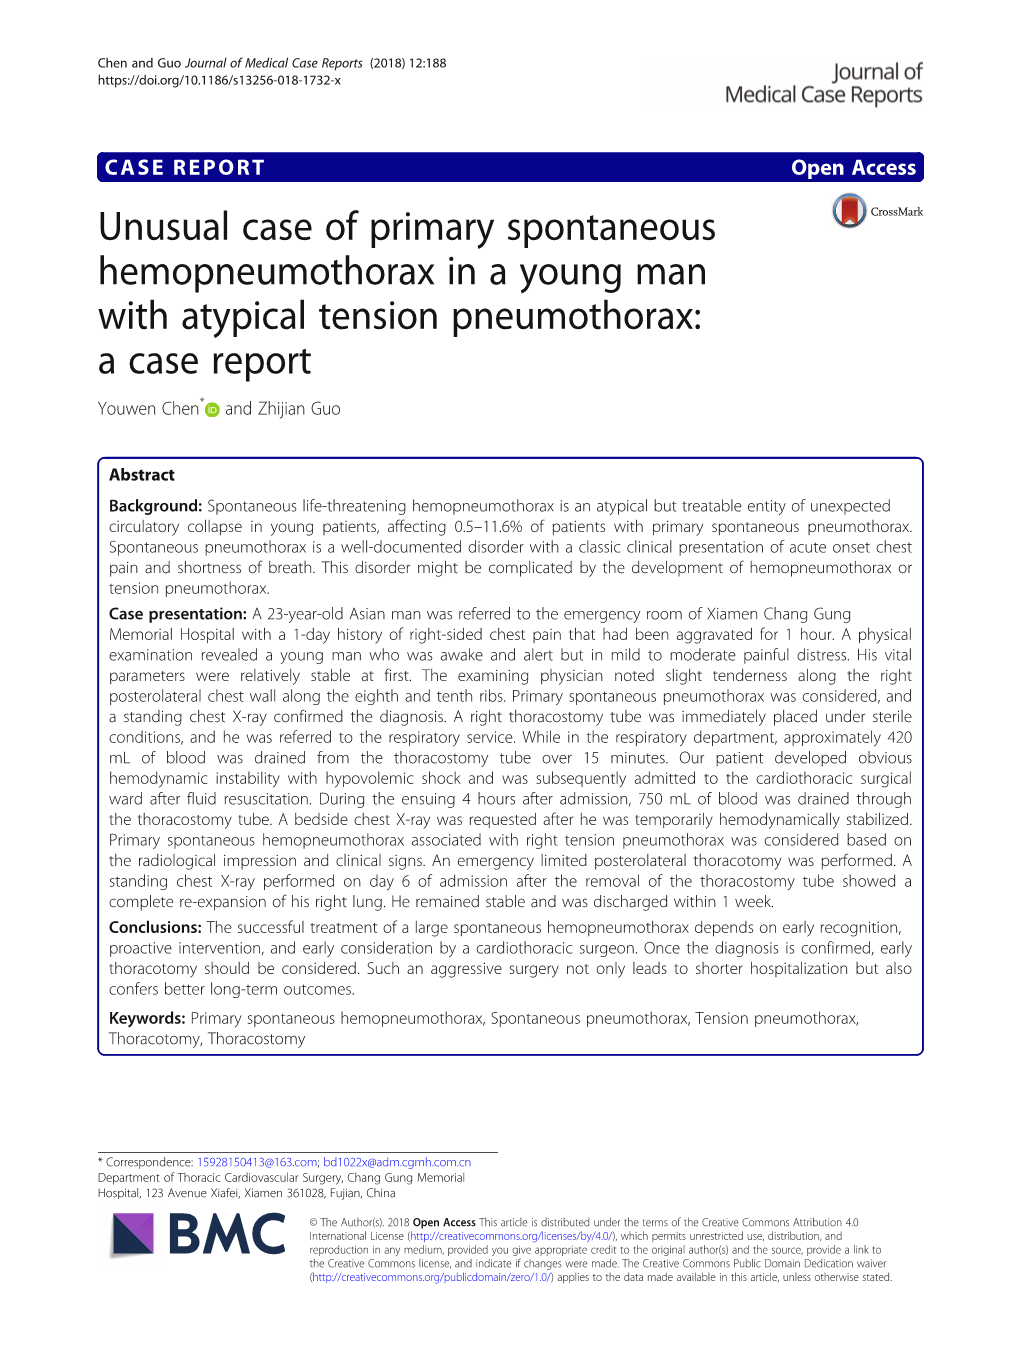 Unusual Case of Primary Spontaneous Hemopneumothorax in a Young Man with Atypical Tension Pneumothorax: a Case Report Youwen Chen* and Zhijian Guo